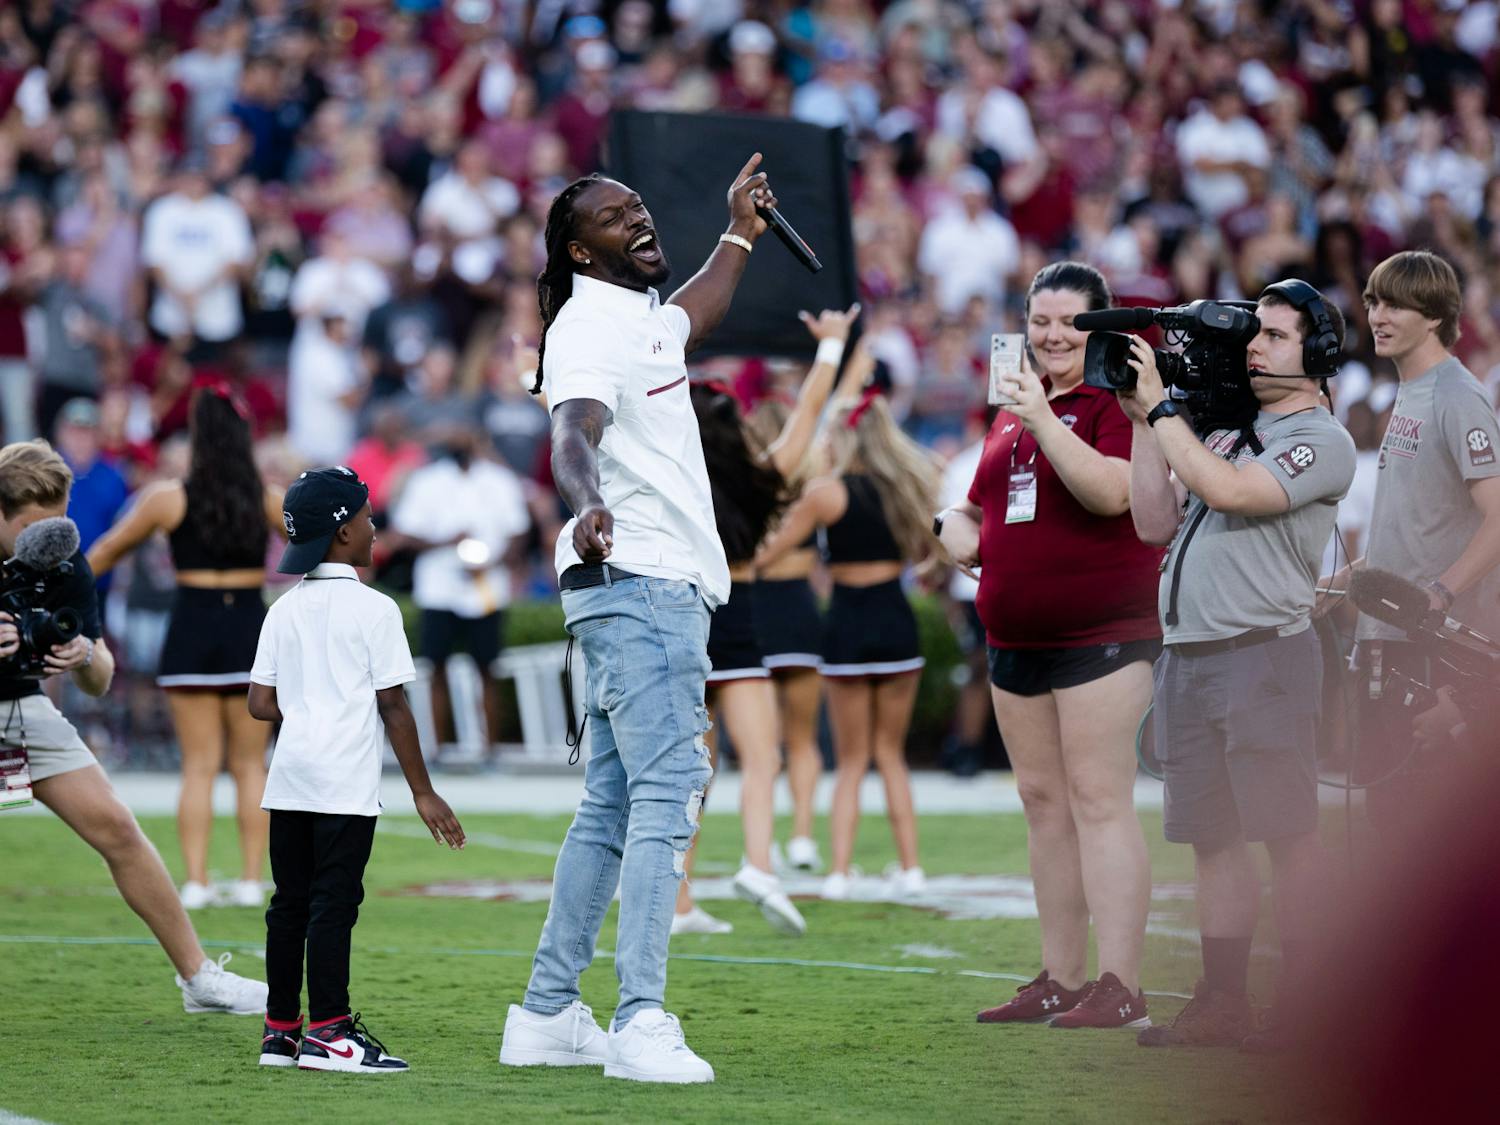 Former Gamecock defensive end Jadeveon Clowney leads the crowd in a chant during the game against Georgia State on Sept. 3, 2022. Clowney's jersey was retired during halftime. 